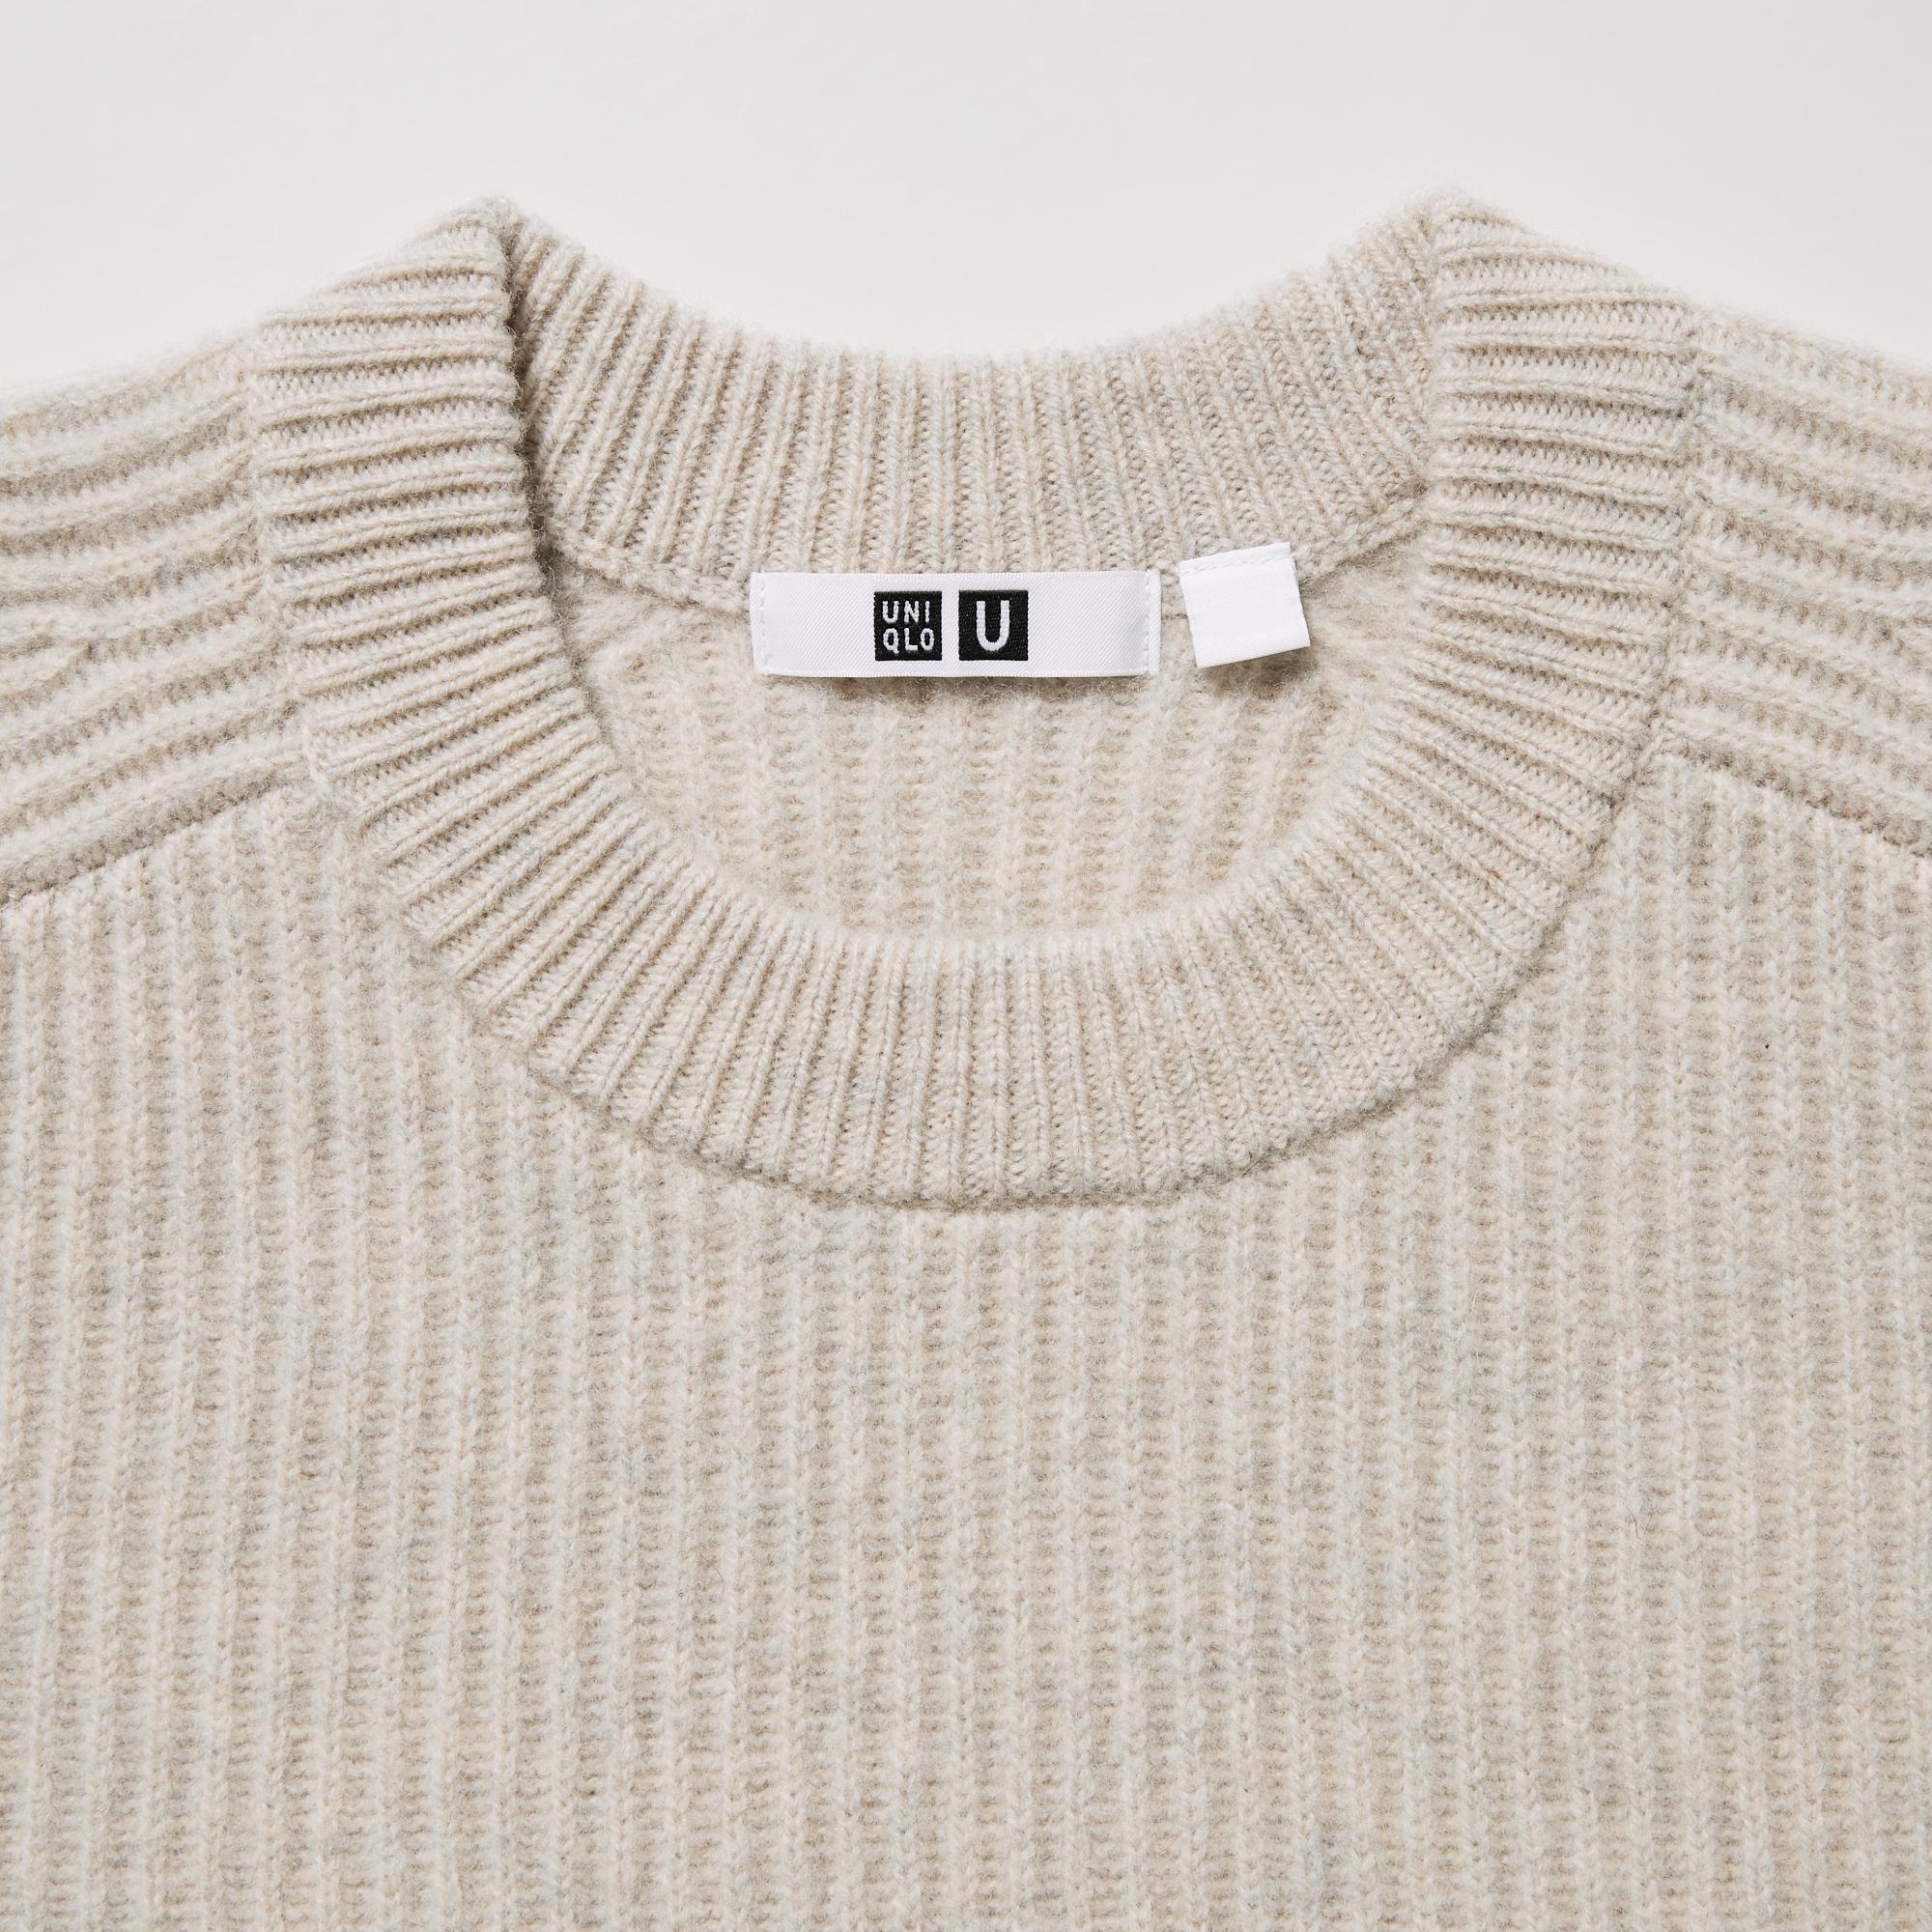 WOMENS V NECK LONG SLEEVE SWEATER  UNIQLO VN